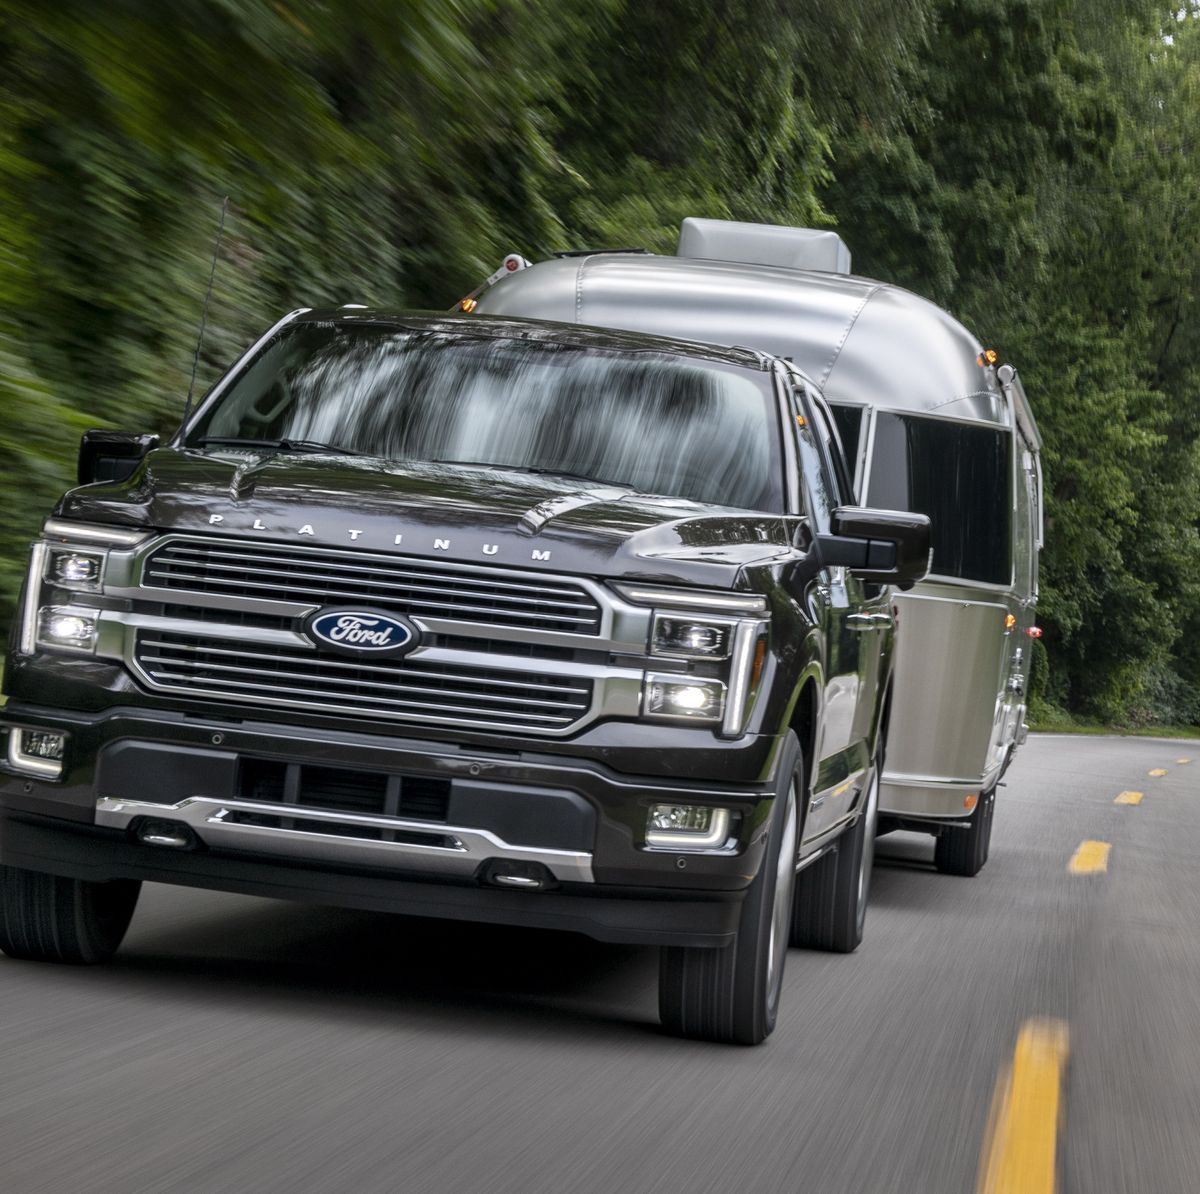 Ford F-150 Trim Levels, F-150 Special Editions